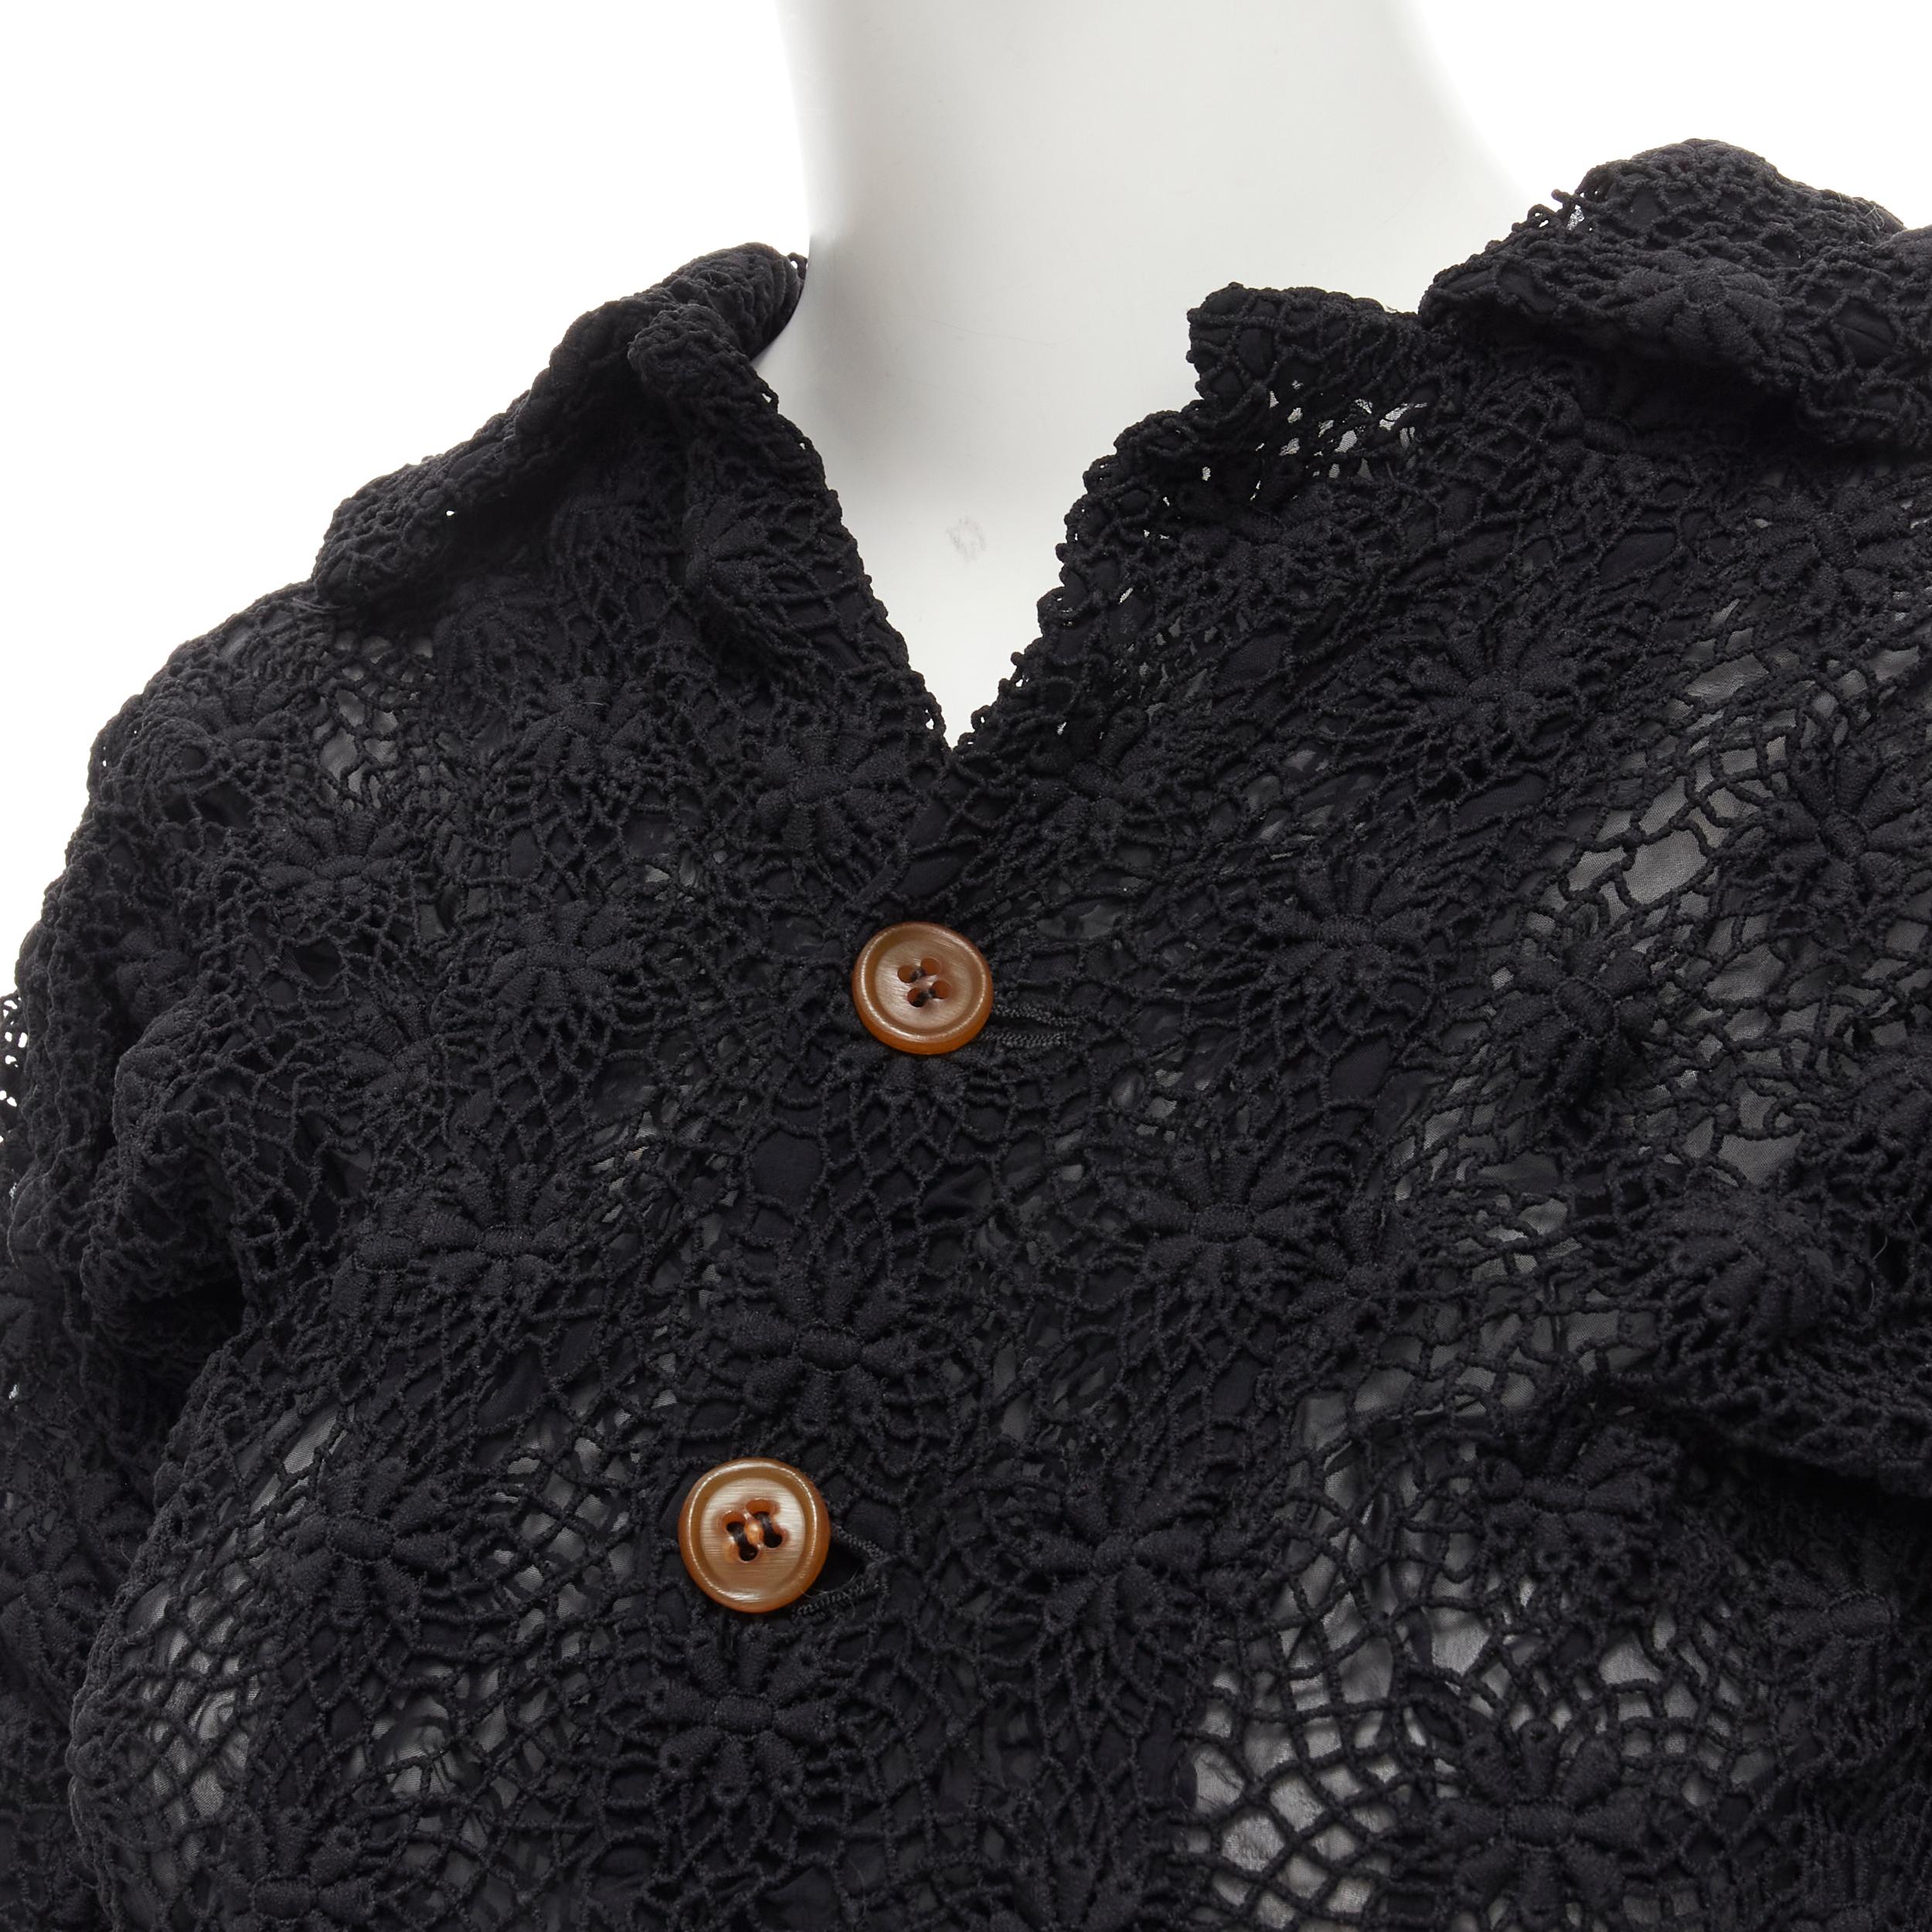 COMME DES GARCONS 2005 black floral crochet lace ruffle tiered hem jacket M 
Reference: CRTI/A00532 
Brand: Comme Des Garcons 
Designer: Rei Kawakubo 
Collection: 2005 
Material: Polyester 
Color: Black 
Pattern: Solid 
Closure: Button 
Extra